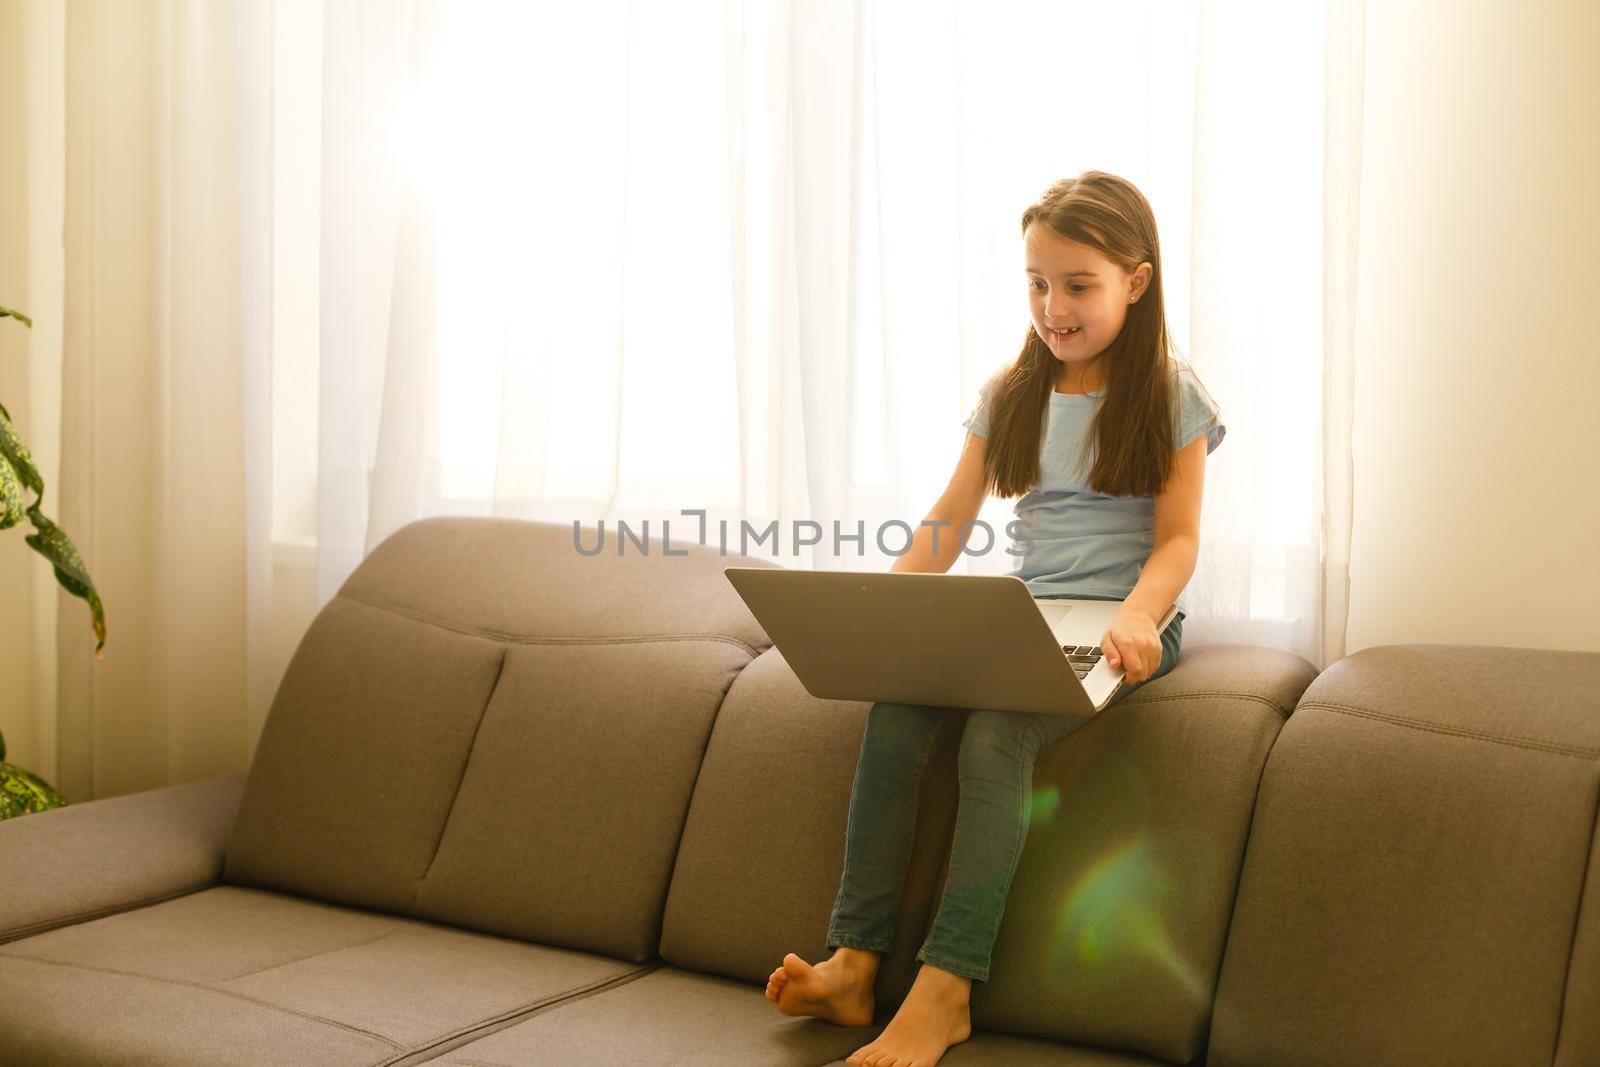 Remote lessons. The child smiles happily and gets knowledge remotely. Little girl study online learning from home with laptop. Online school.